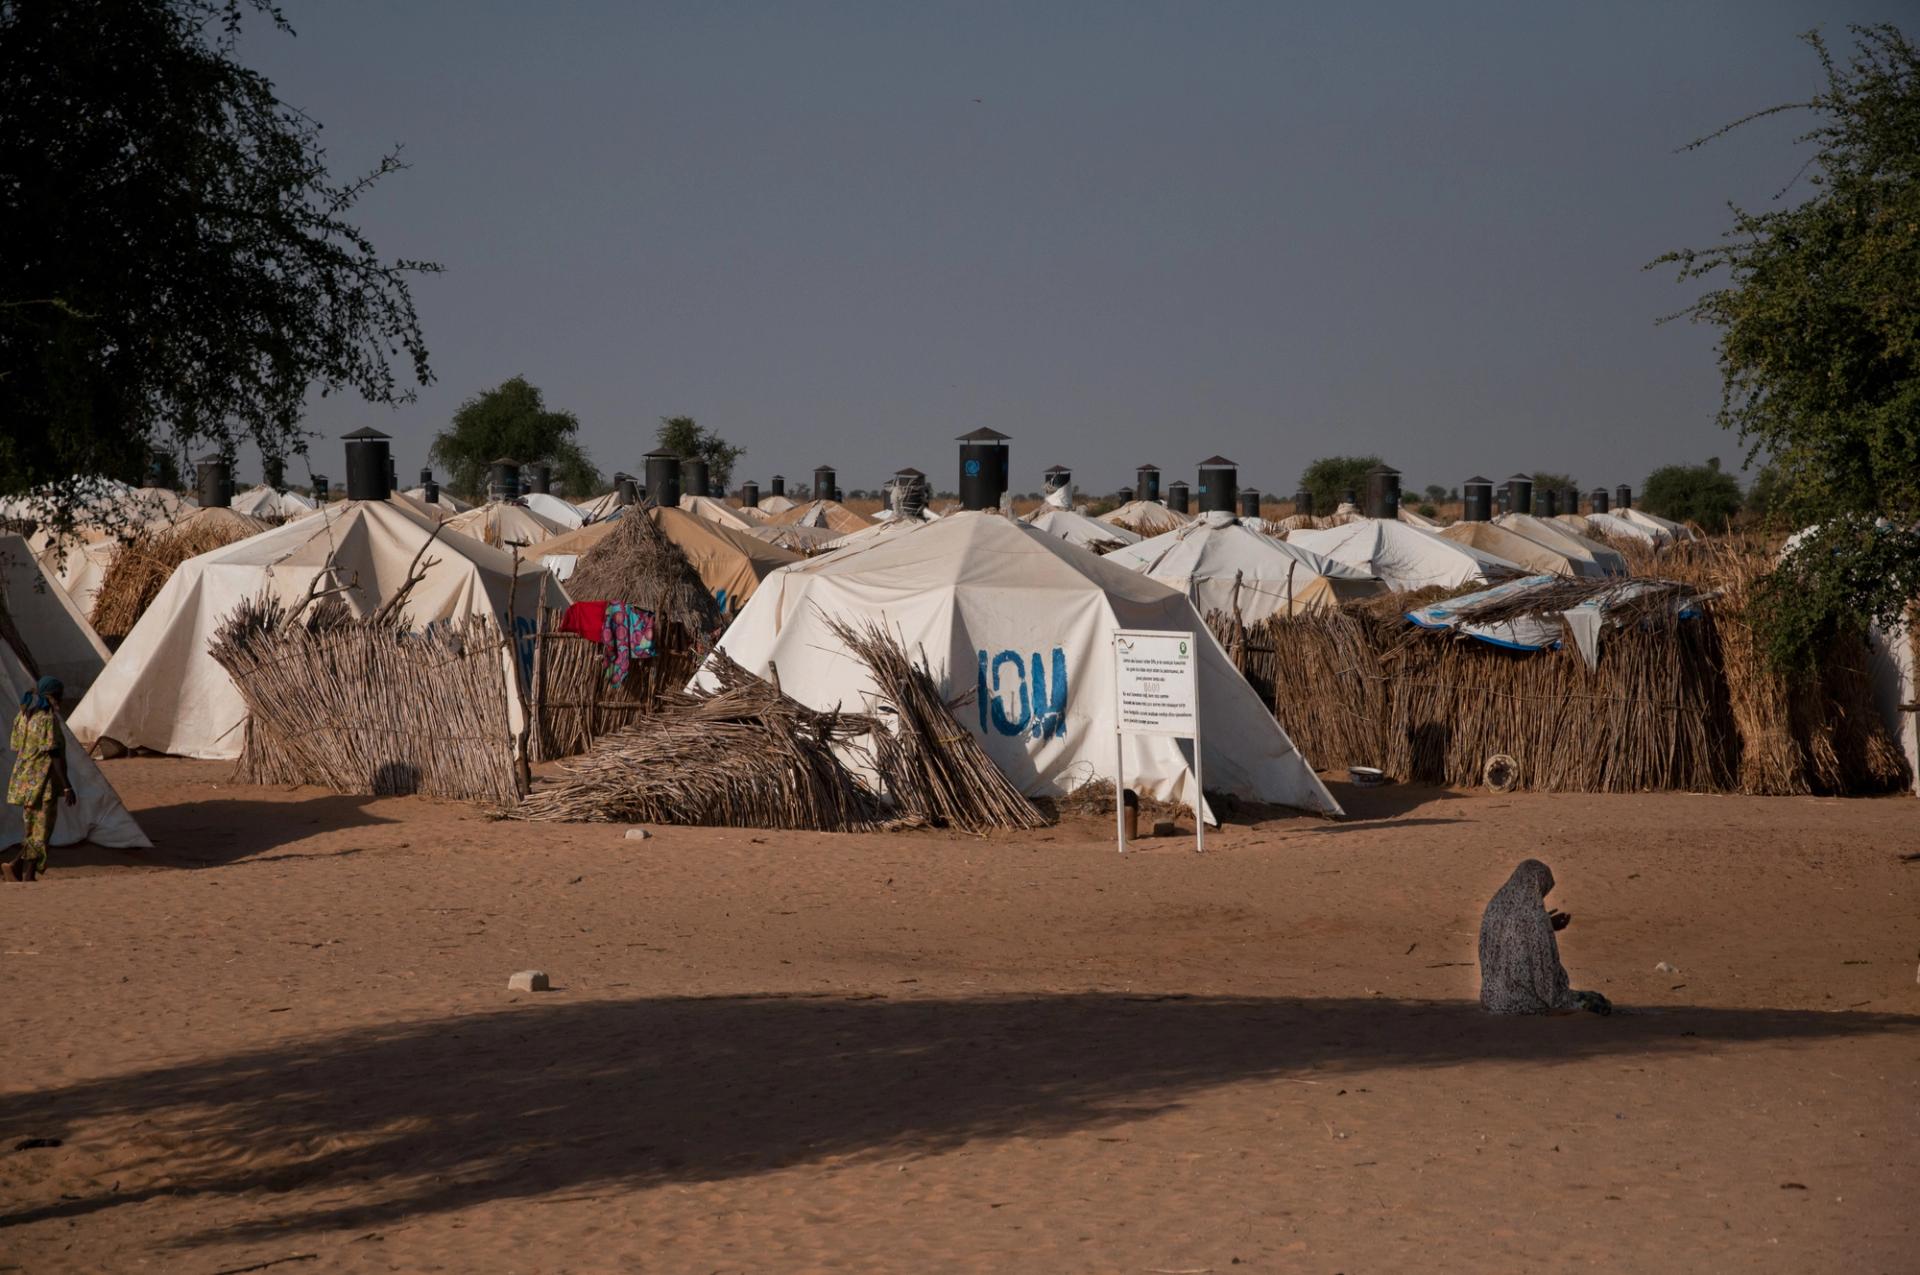 A woman prays in front of a camp for people displaced by the conflict against Boko Haram.